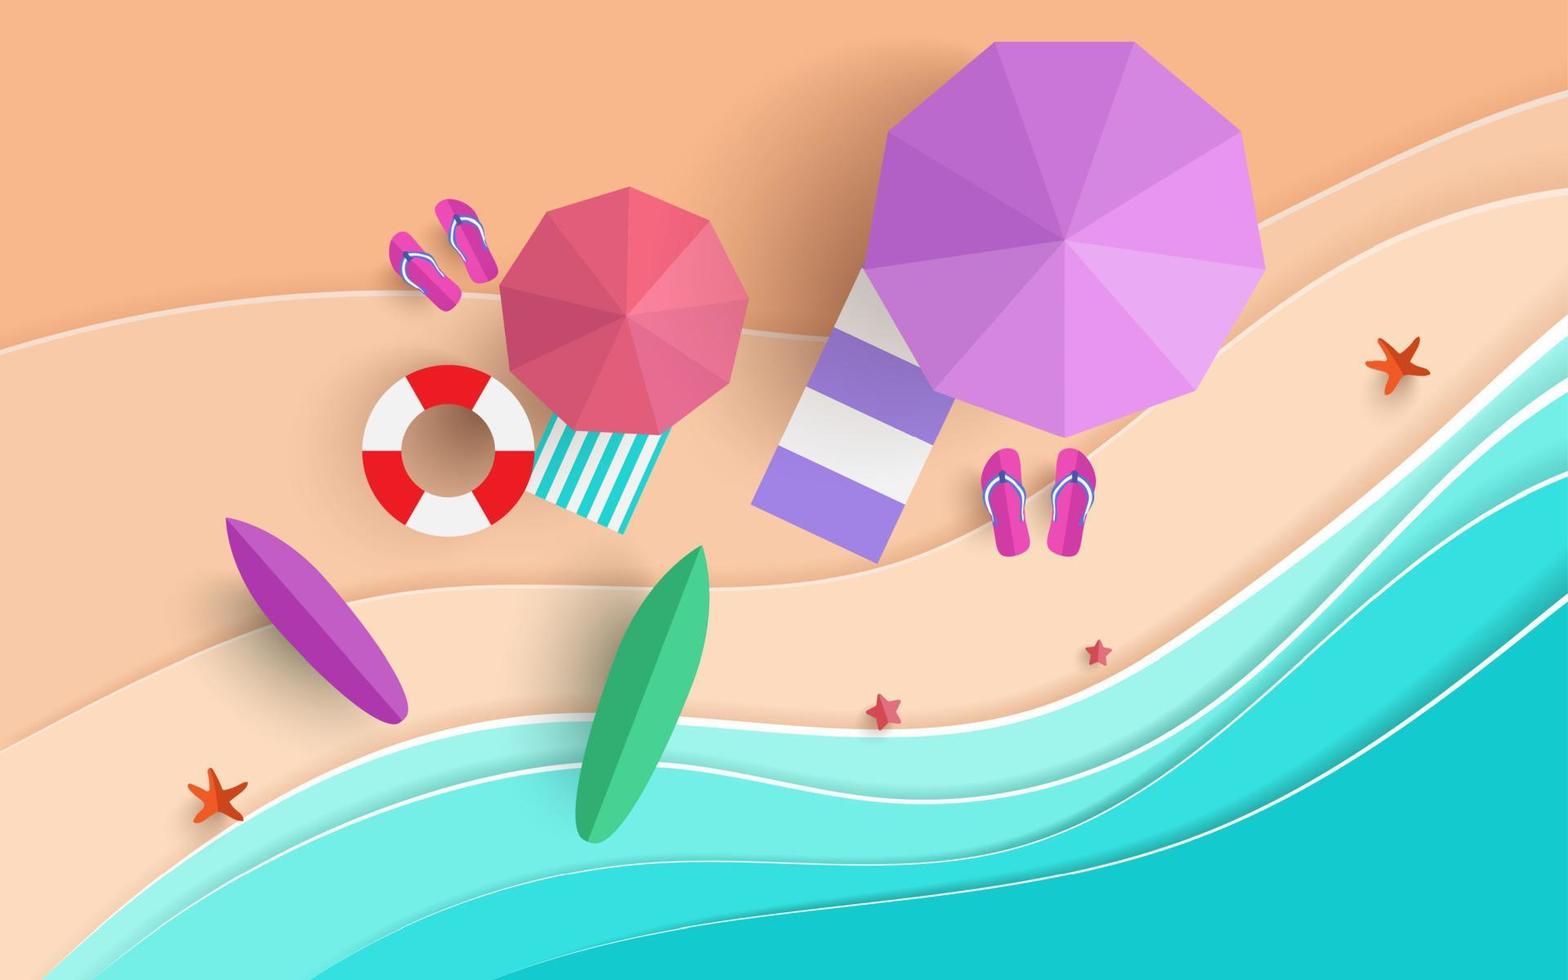 the beach scene from the top in summer.vector illustration with paper cut design. happy holiday vector